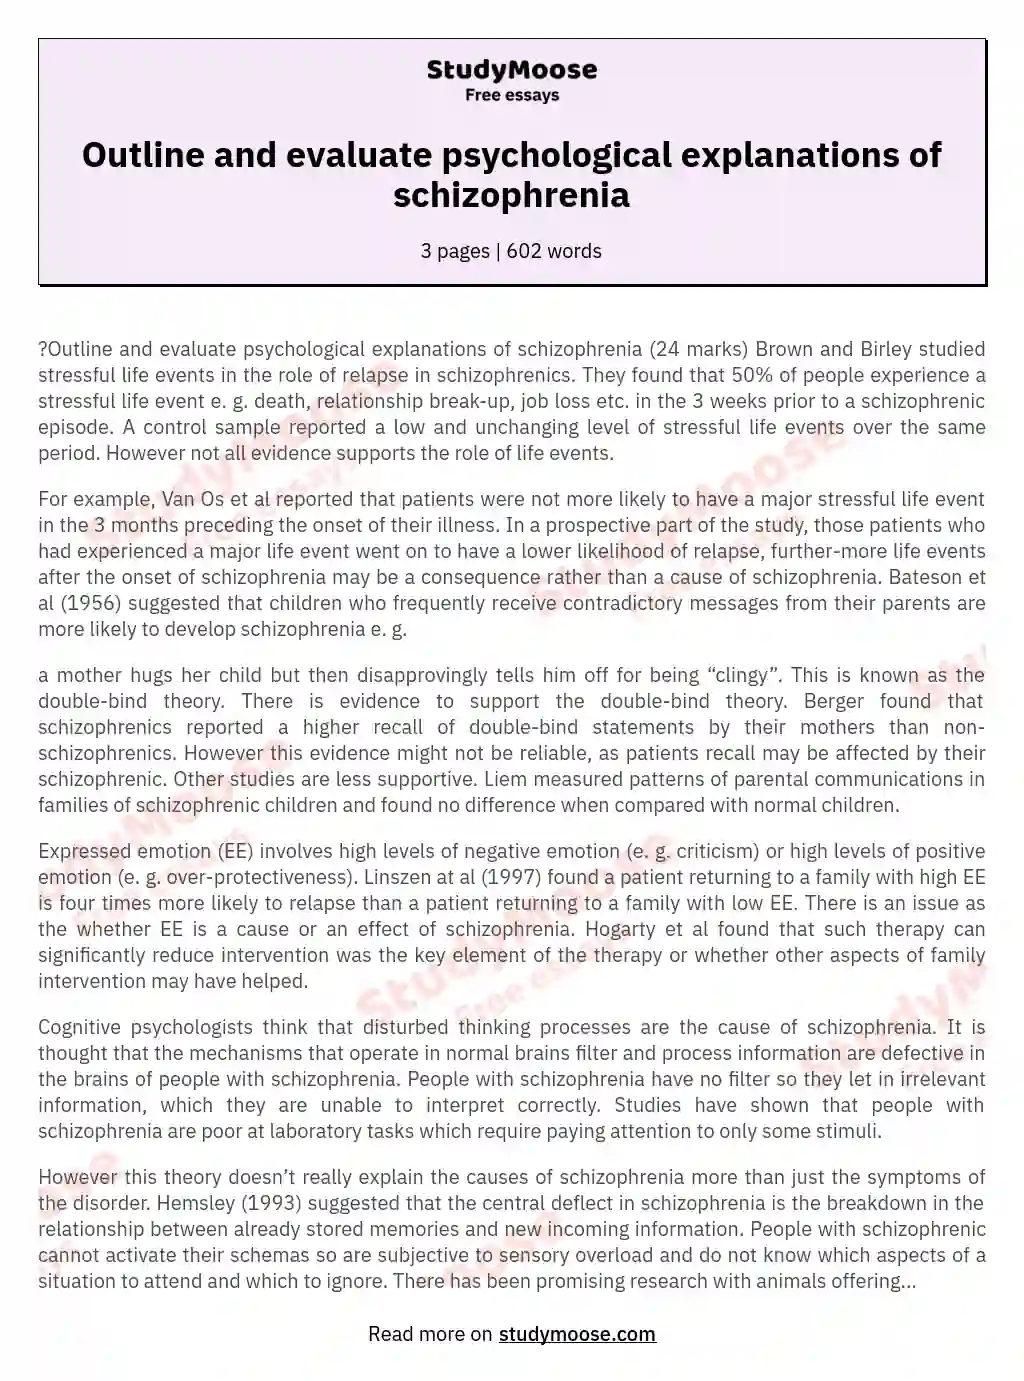 Outline and evaluate psychological explanations of schizophrenia